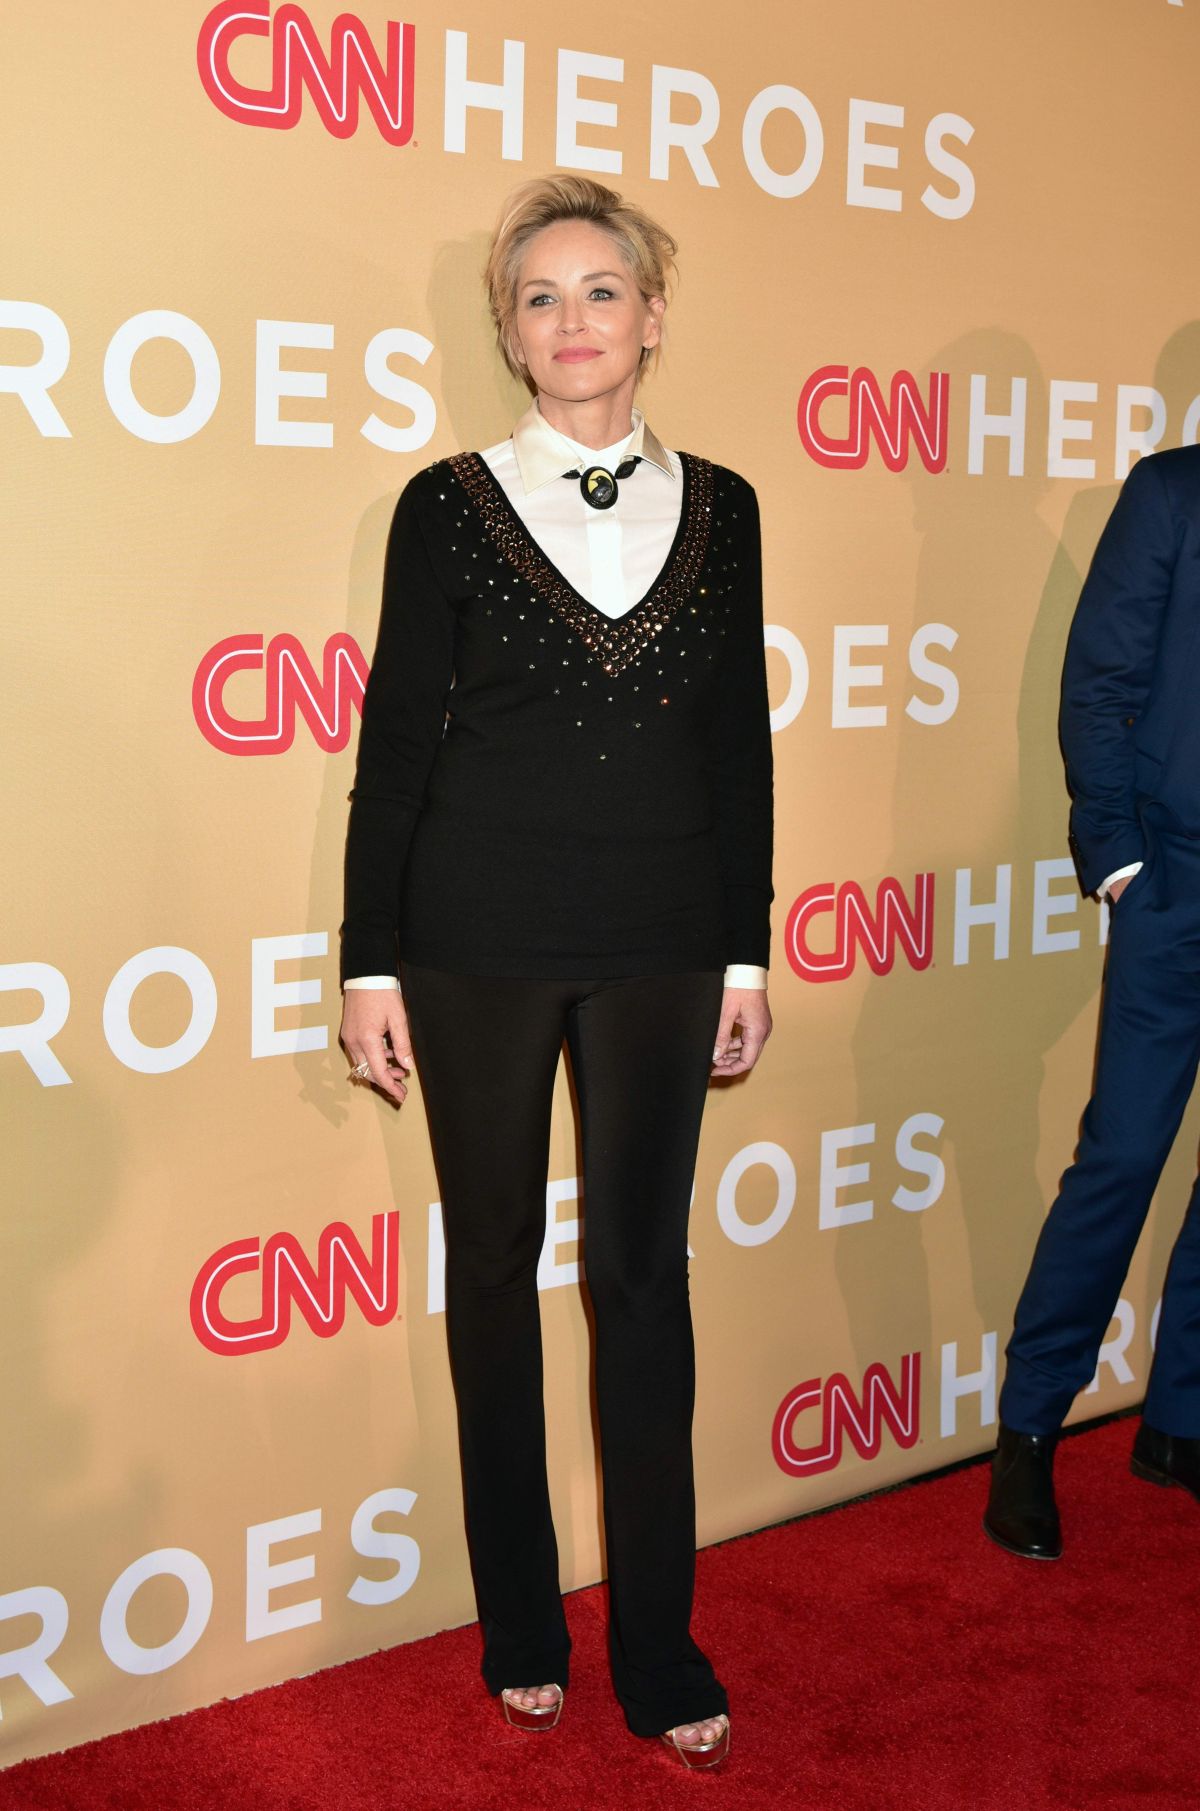 SHARON STONE at CNN Heroes 2015 in New York 11/17/2015 – HawtCelebs